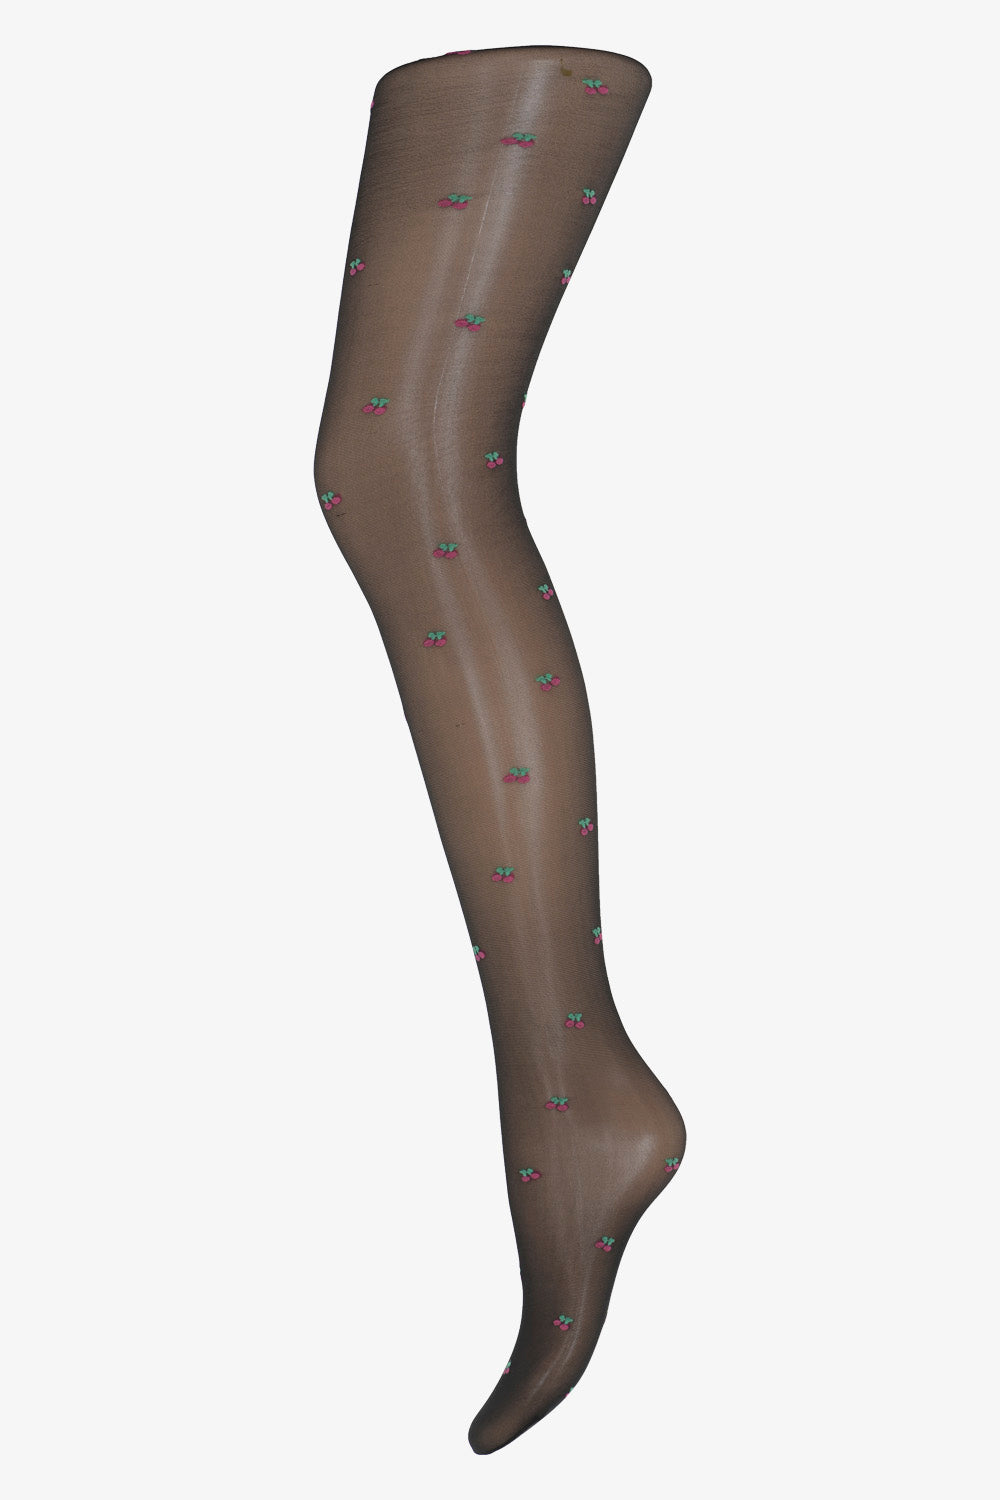 Tights Cherry - Black - Hype the Detail - Sort S/M